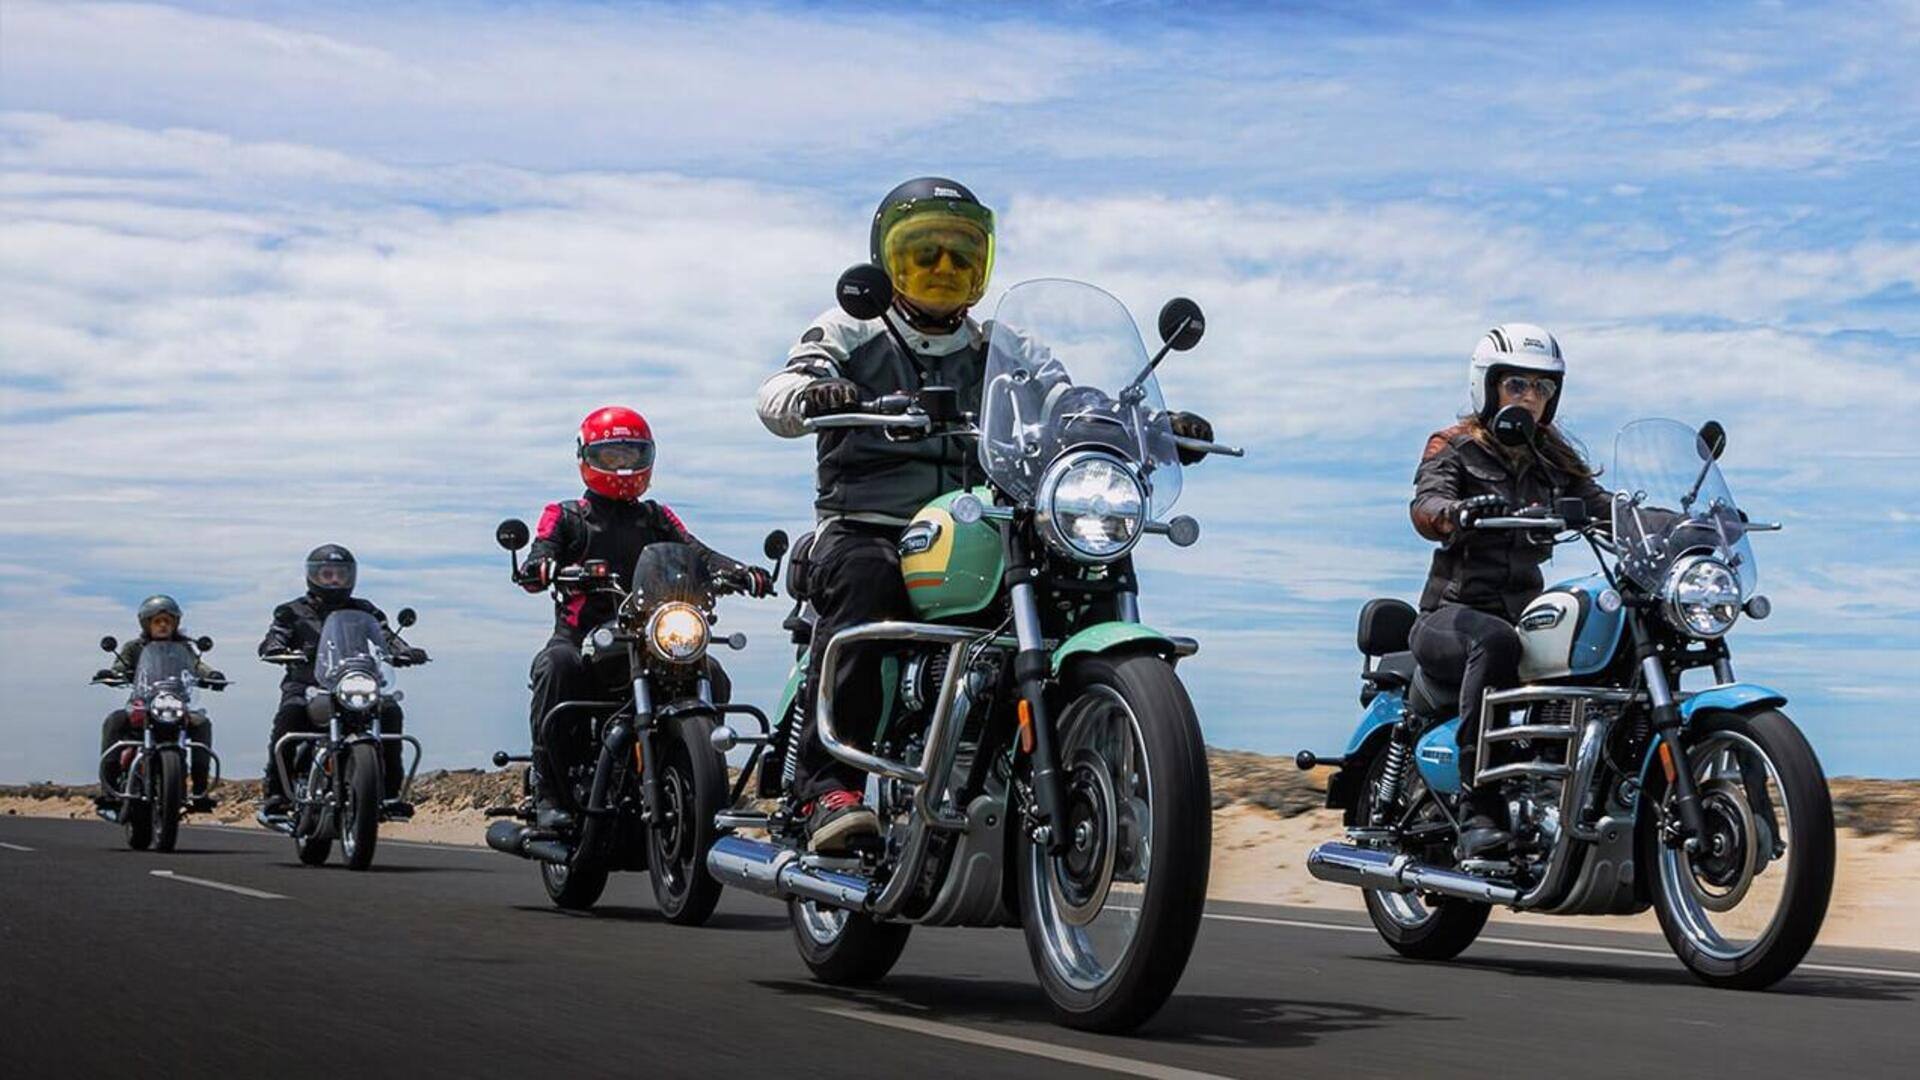 Royal Enfield Meteor 350 gets Aurora variant: Check price, features